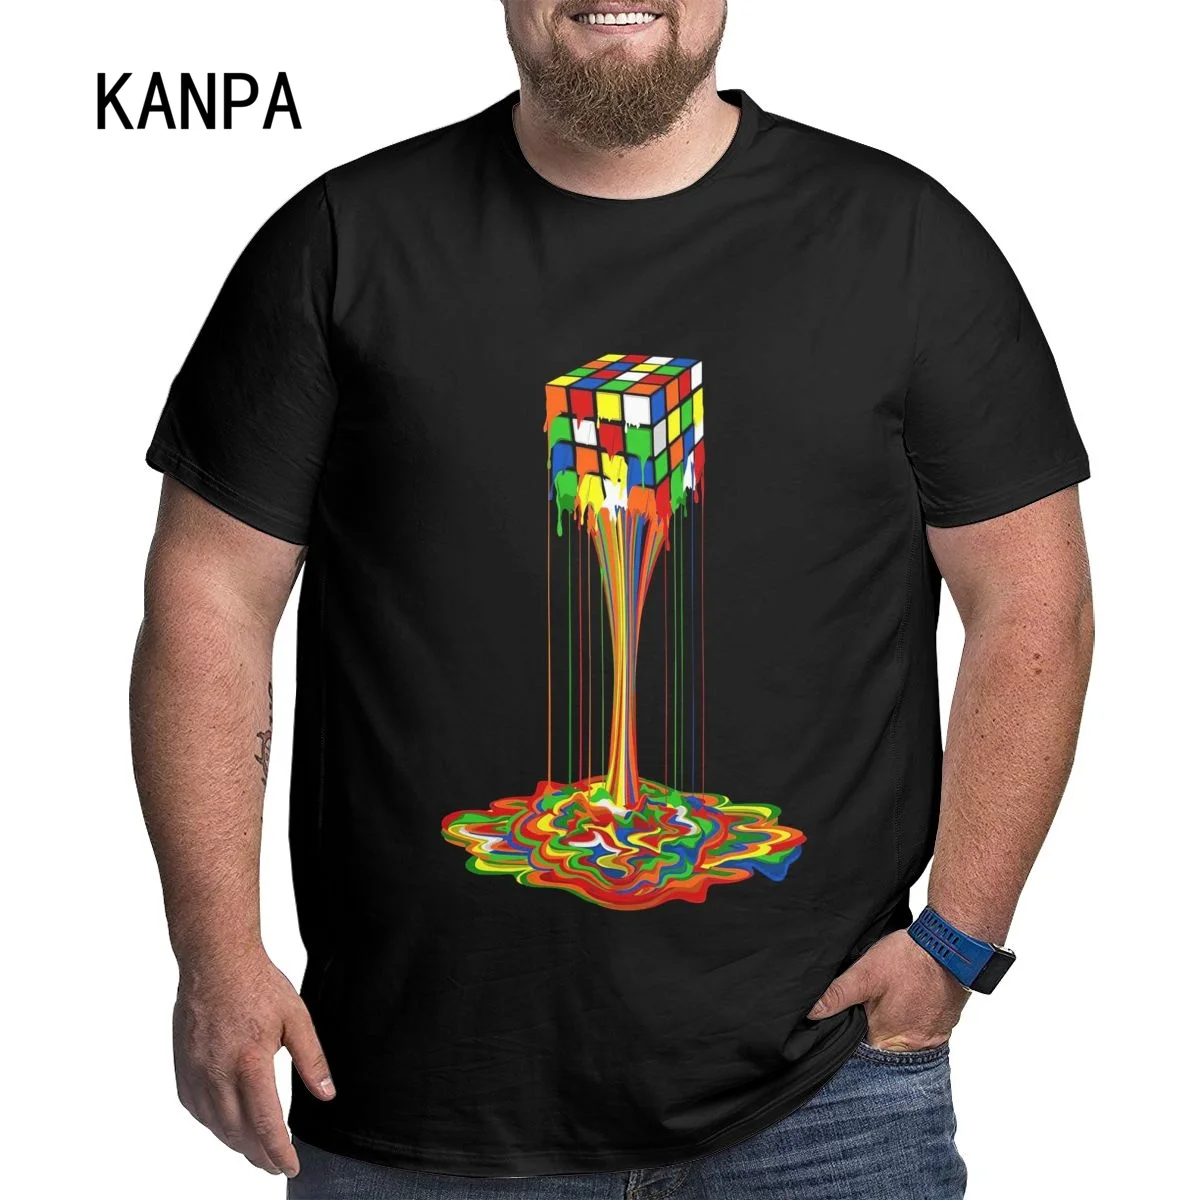 

Plus Size Tshirt Rainbow Abstraction Melted Cube Image Pure Cotton oversize T-Shirt Best Gift Men Tops & Tees Good Quality 6xl